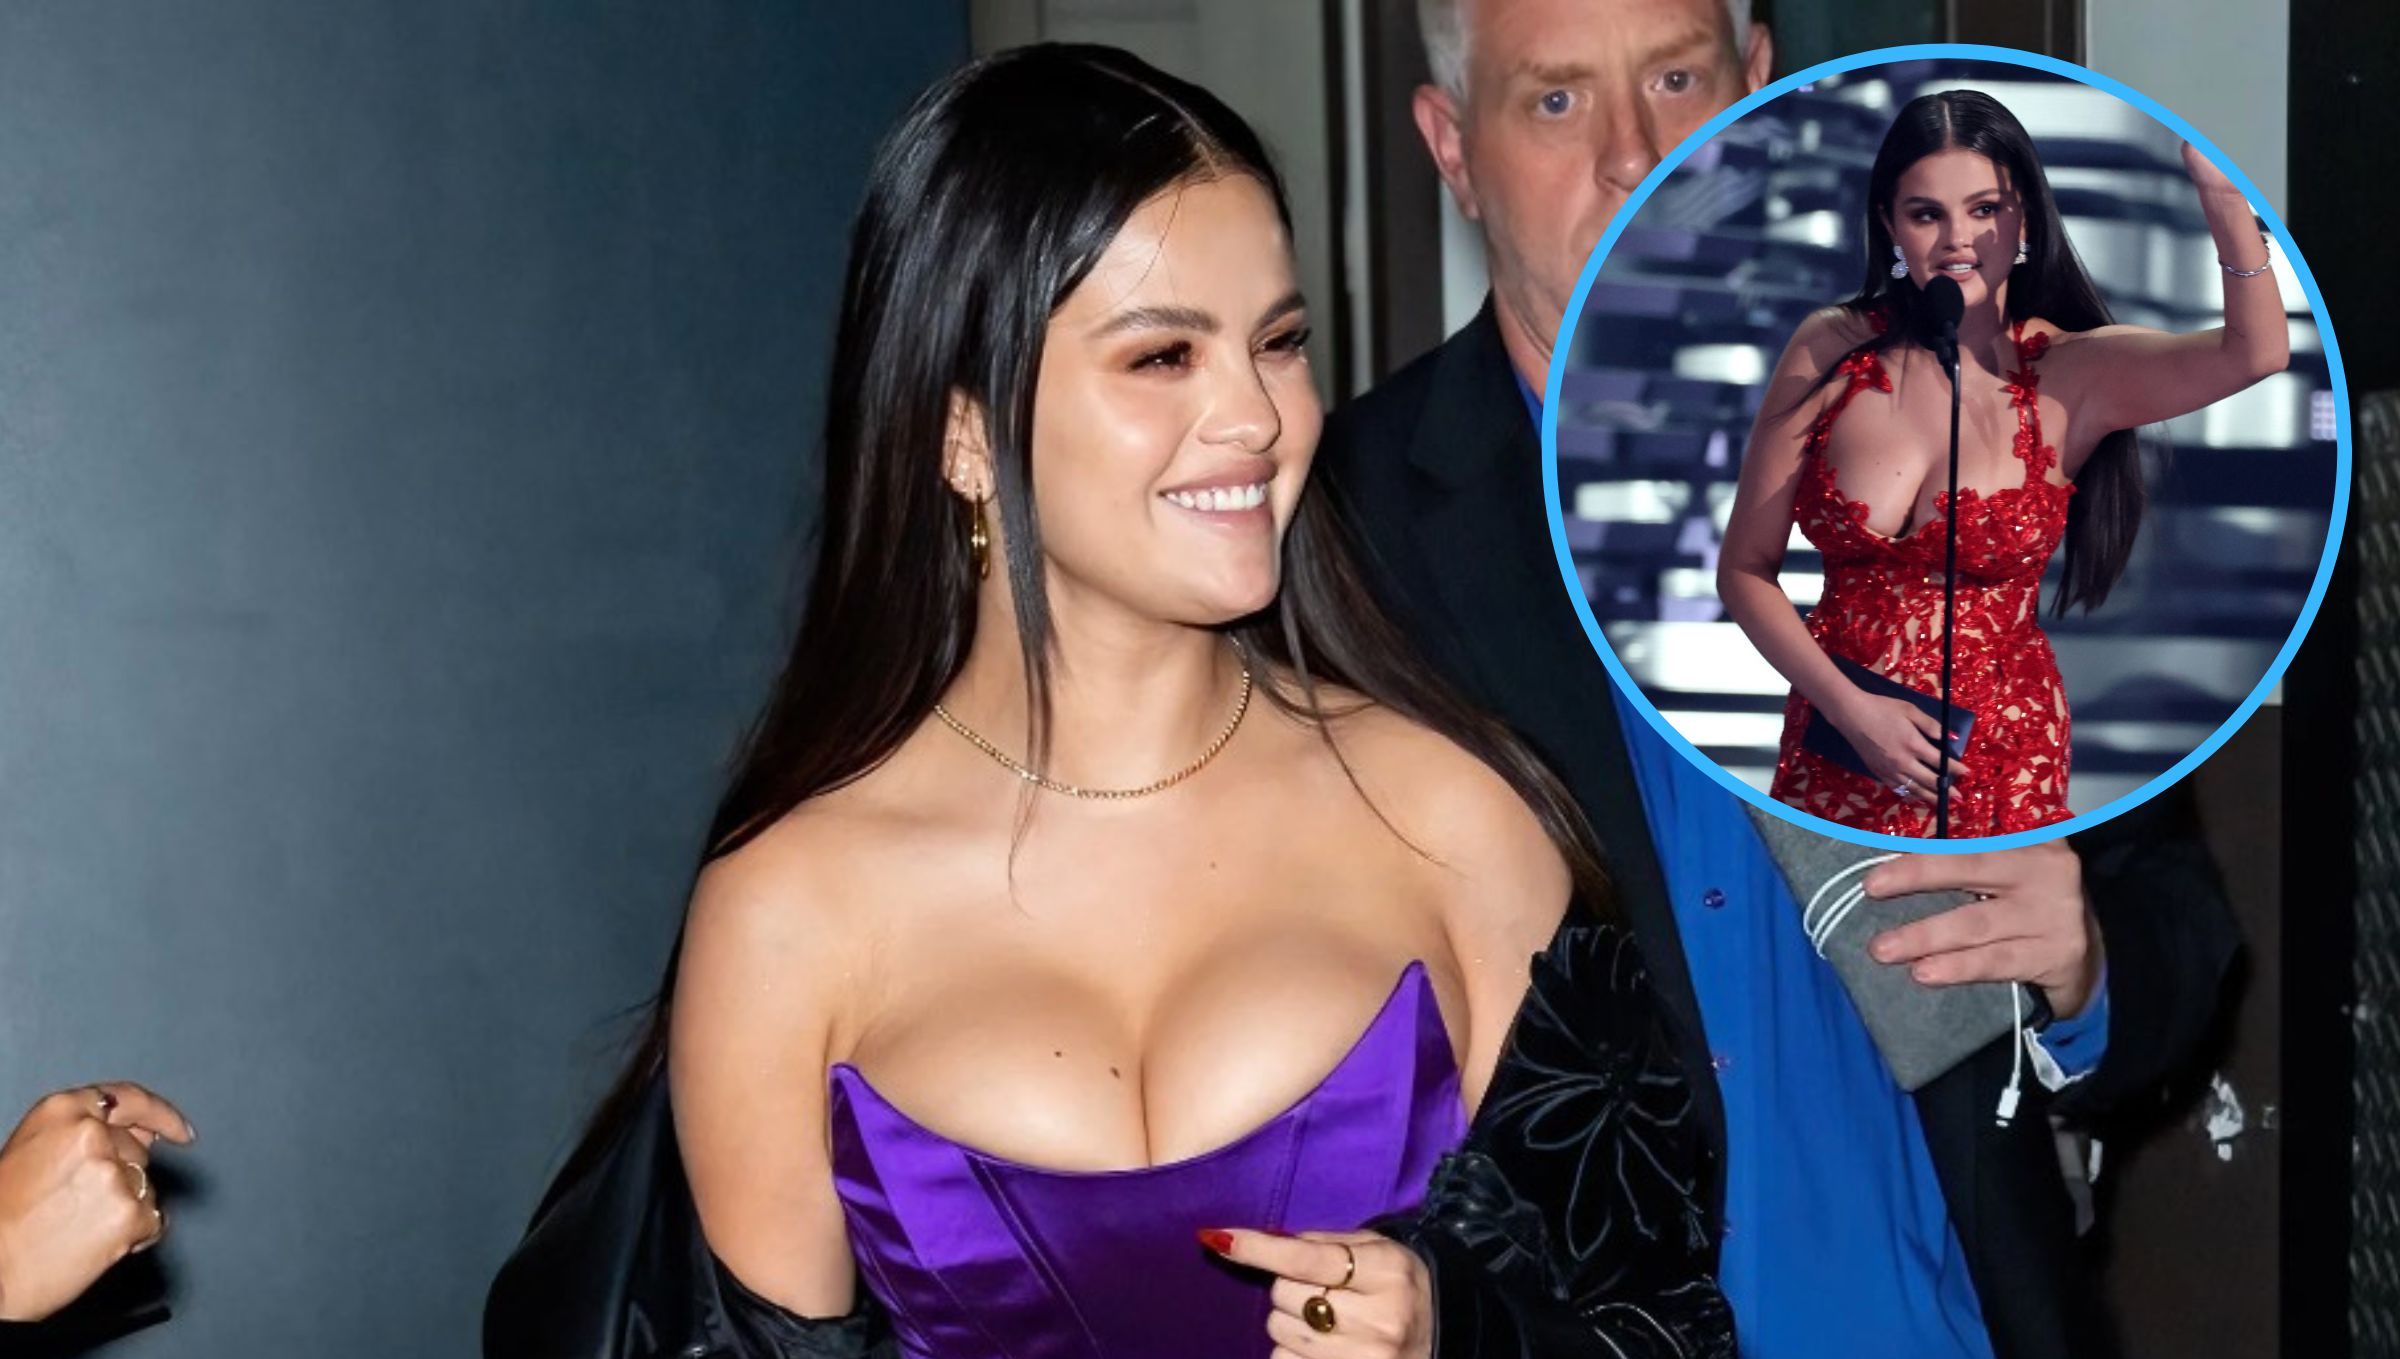 cindy weinschenk recommends selena gomez see through bikini pic